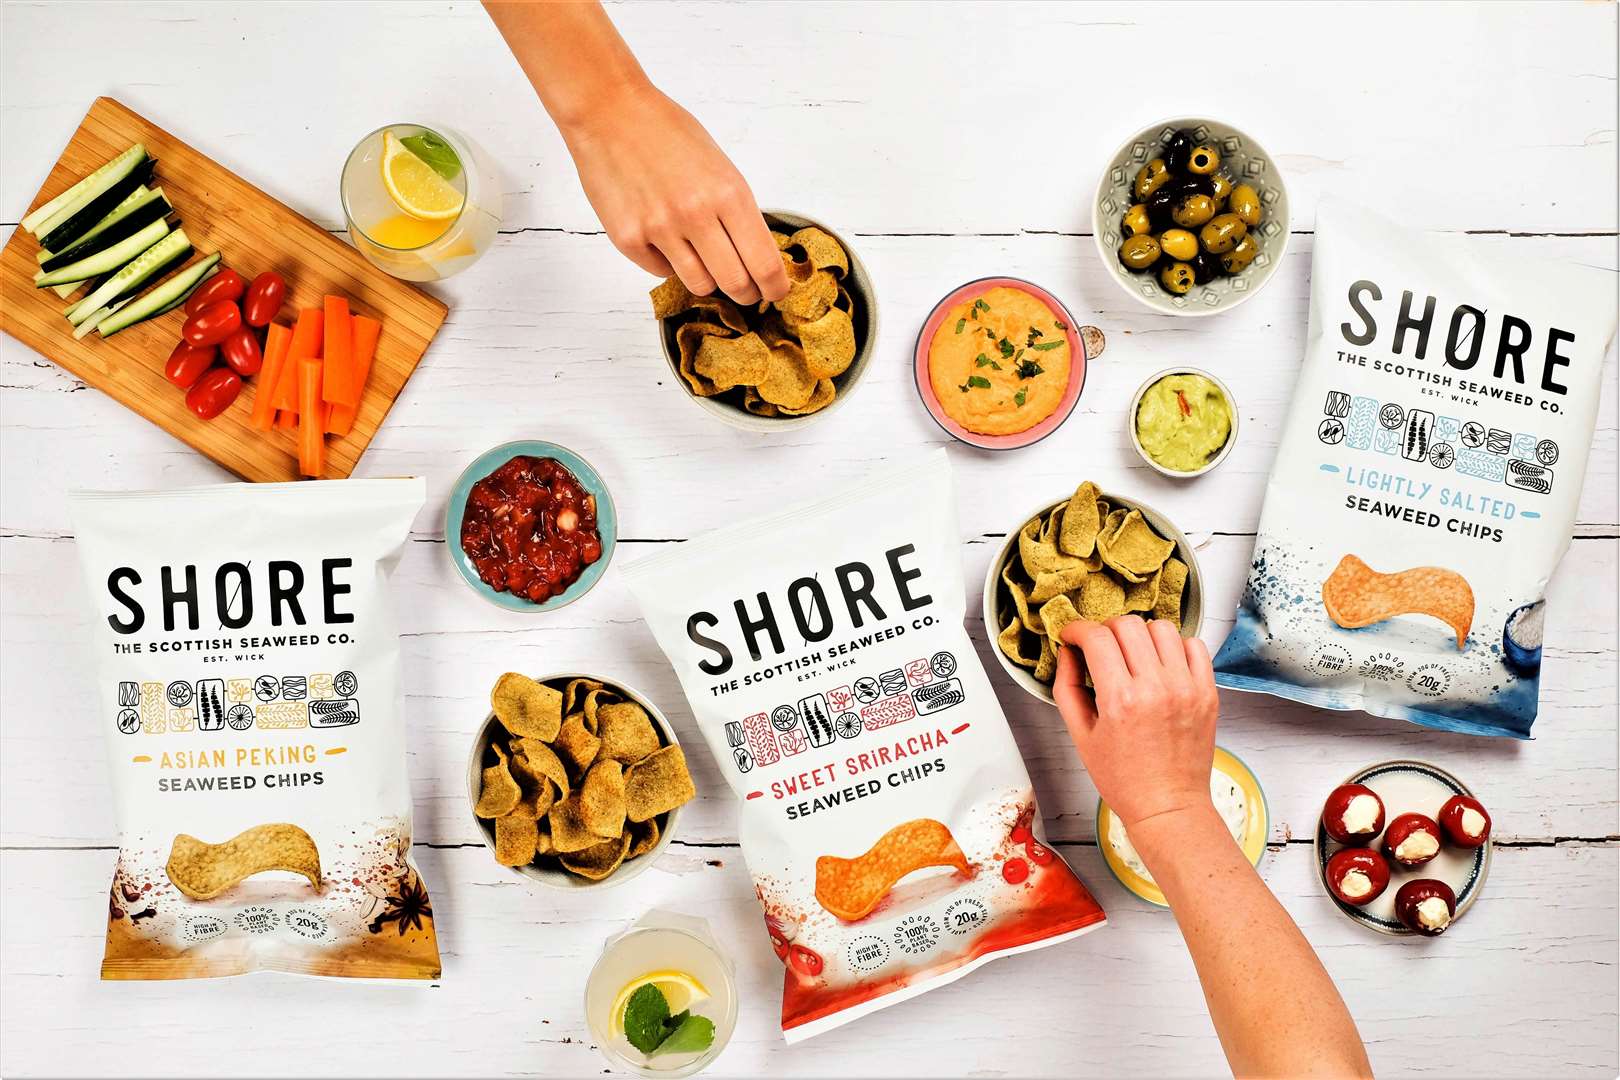 SHORE is based in Wick and utilises locally harvested seaweed for its range of snacks and dips.